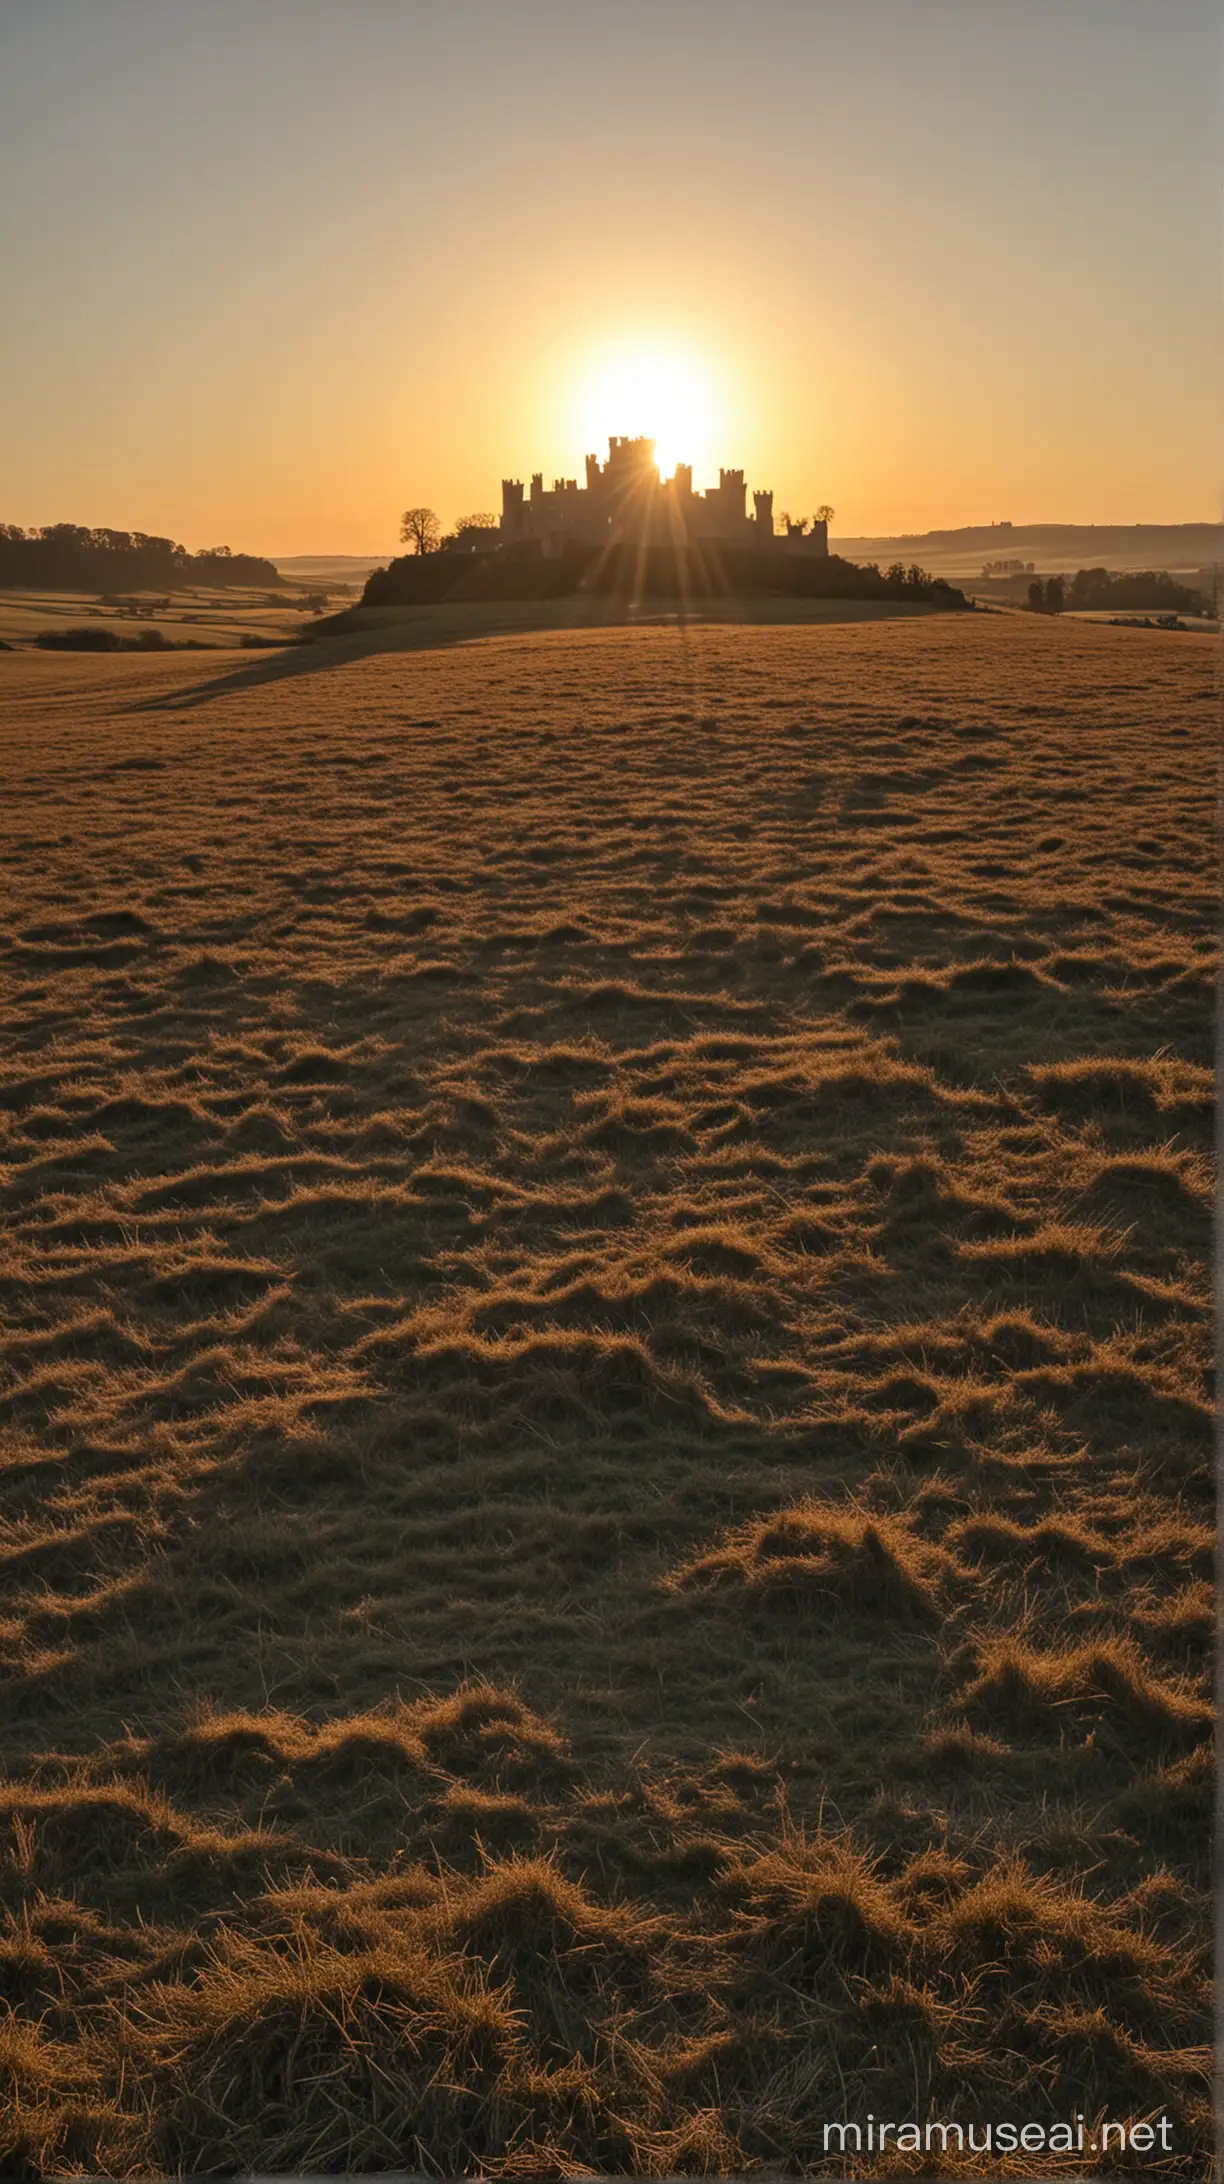 Sunset Silhouette of Castle on Land with Long Shadows